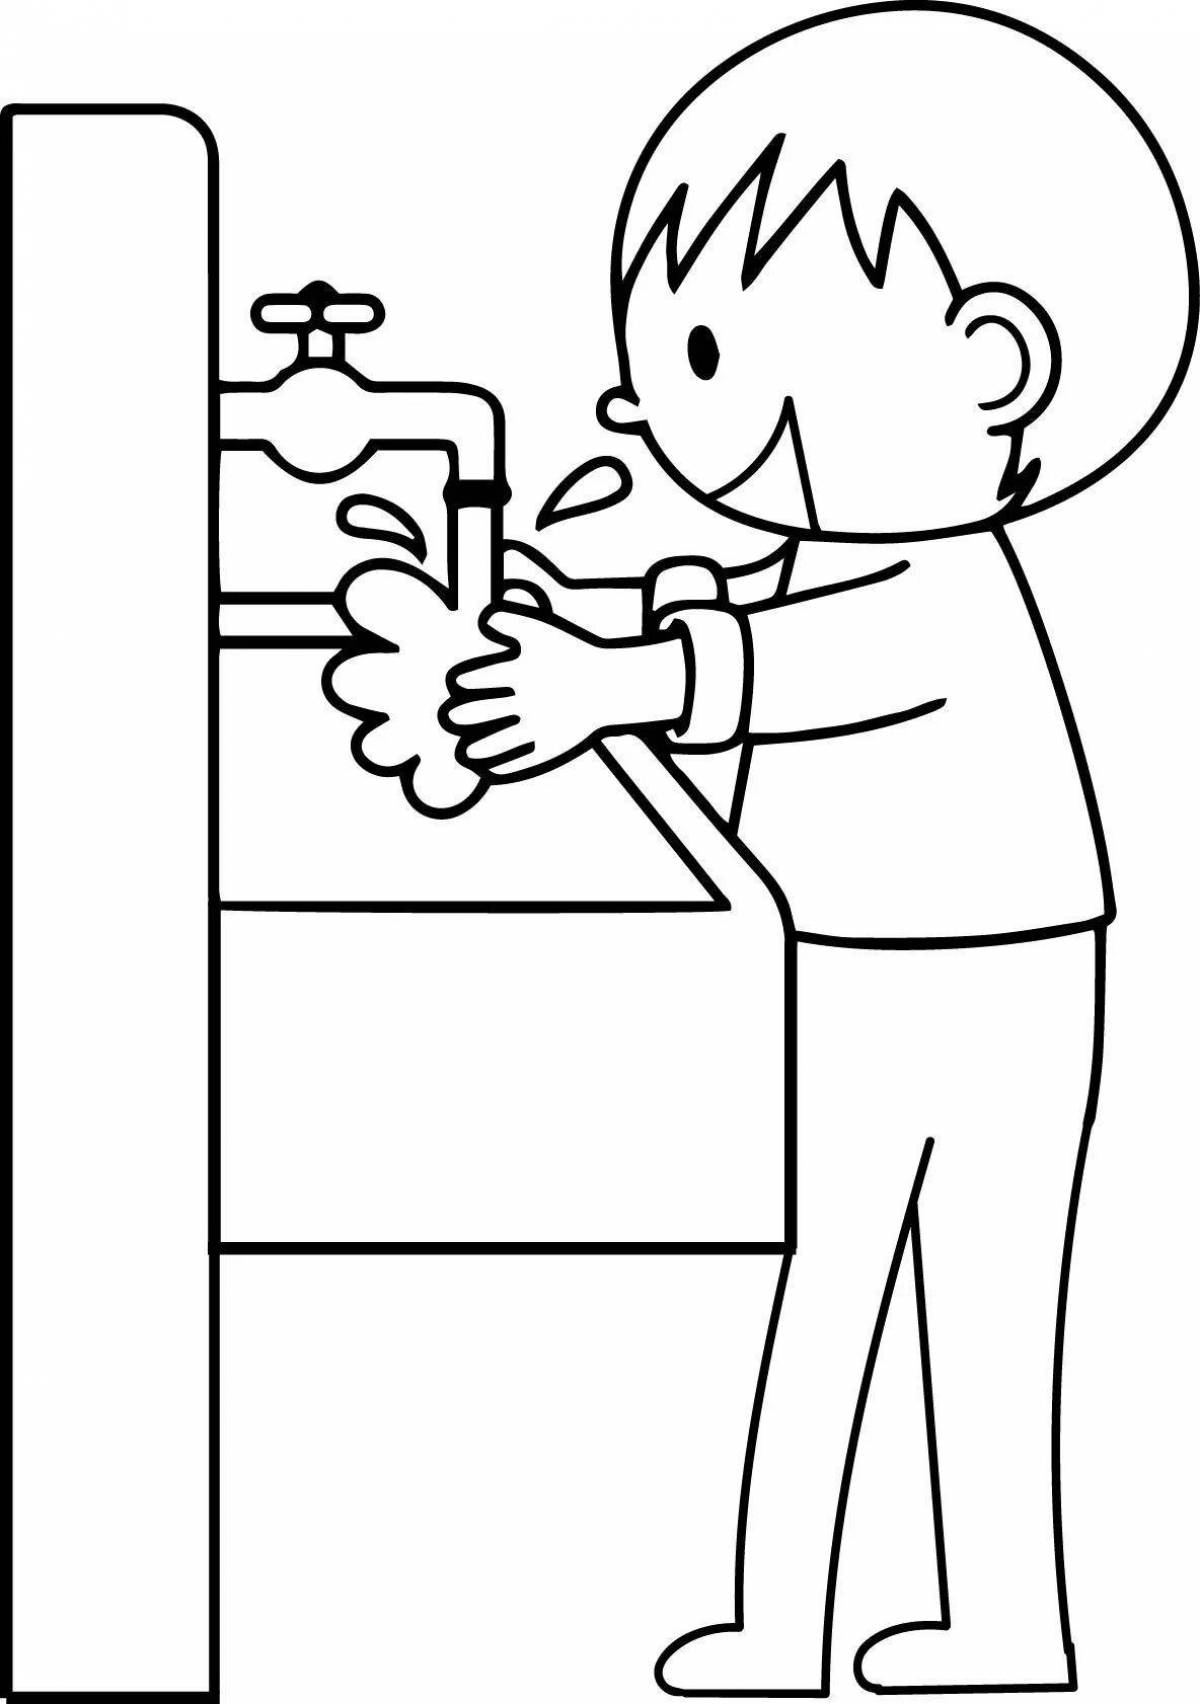 I wash my face coloring page